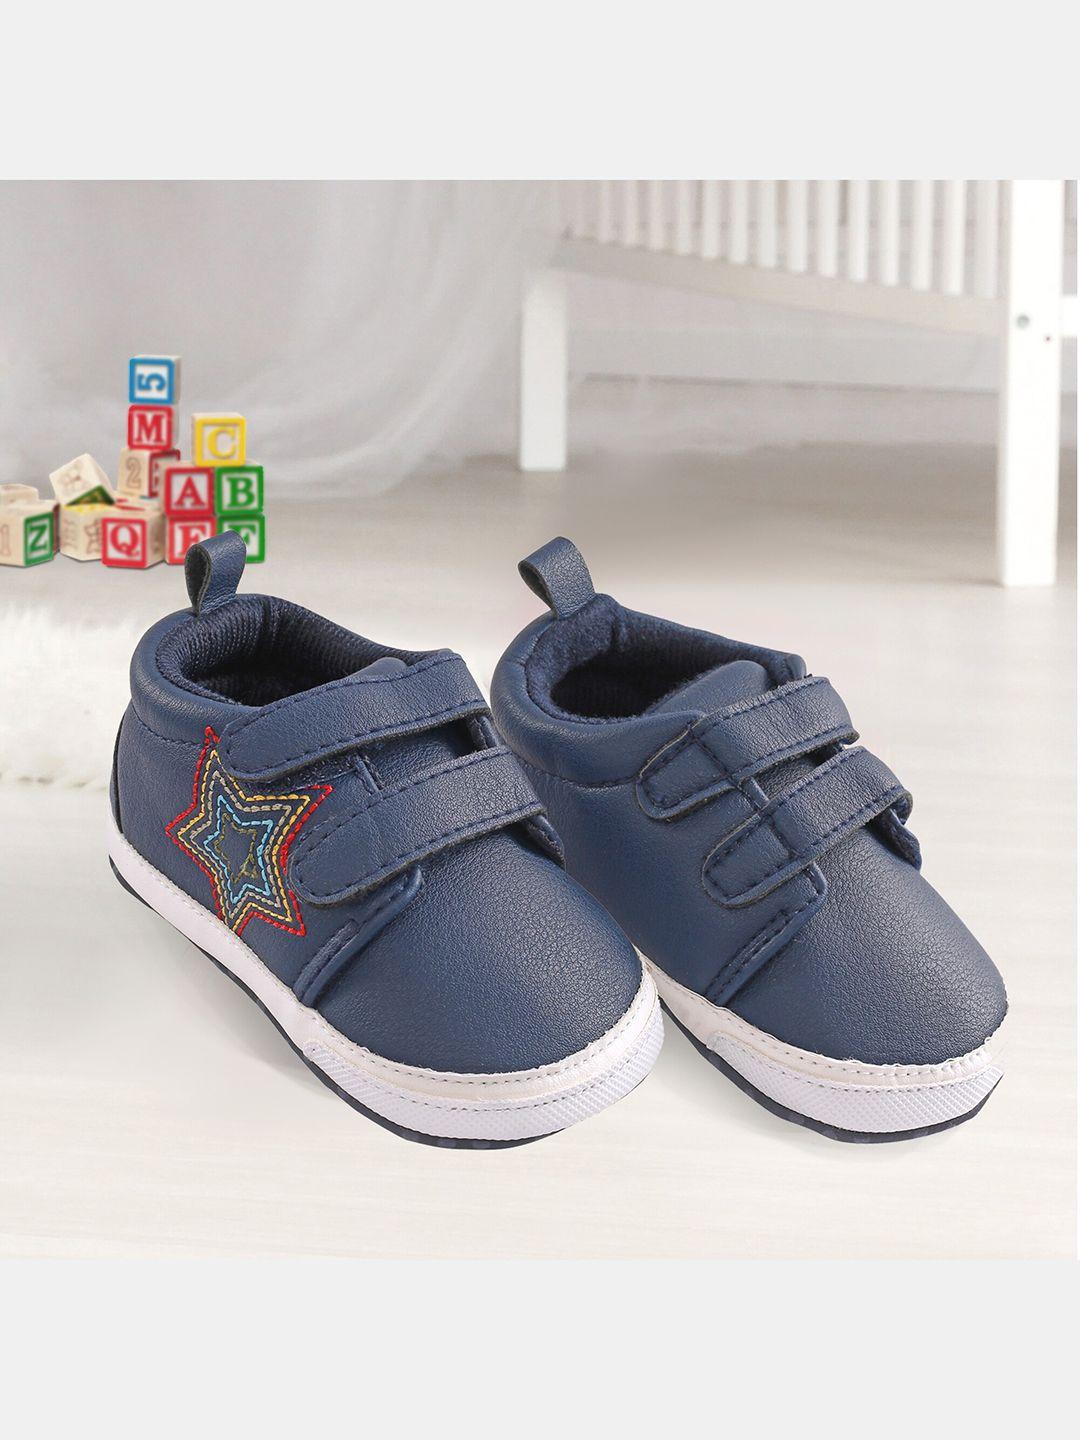 baby moo kids blue star-patterned booties